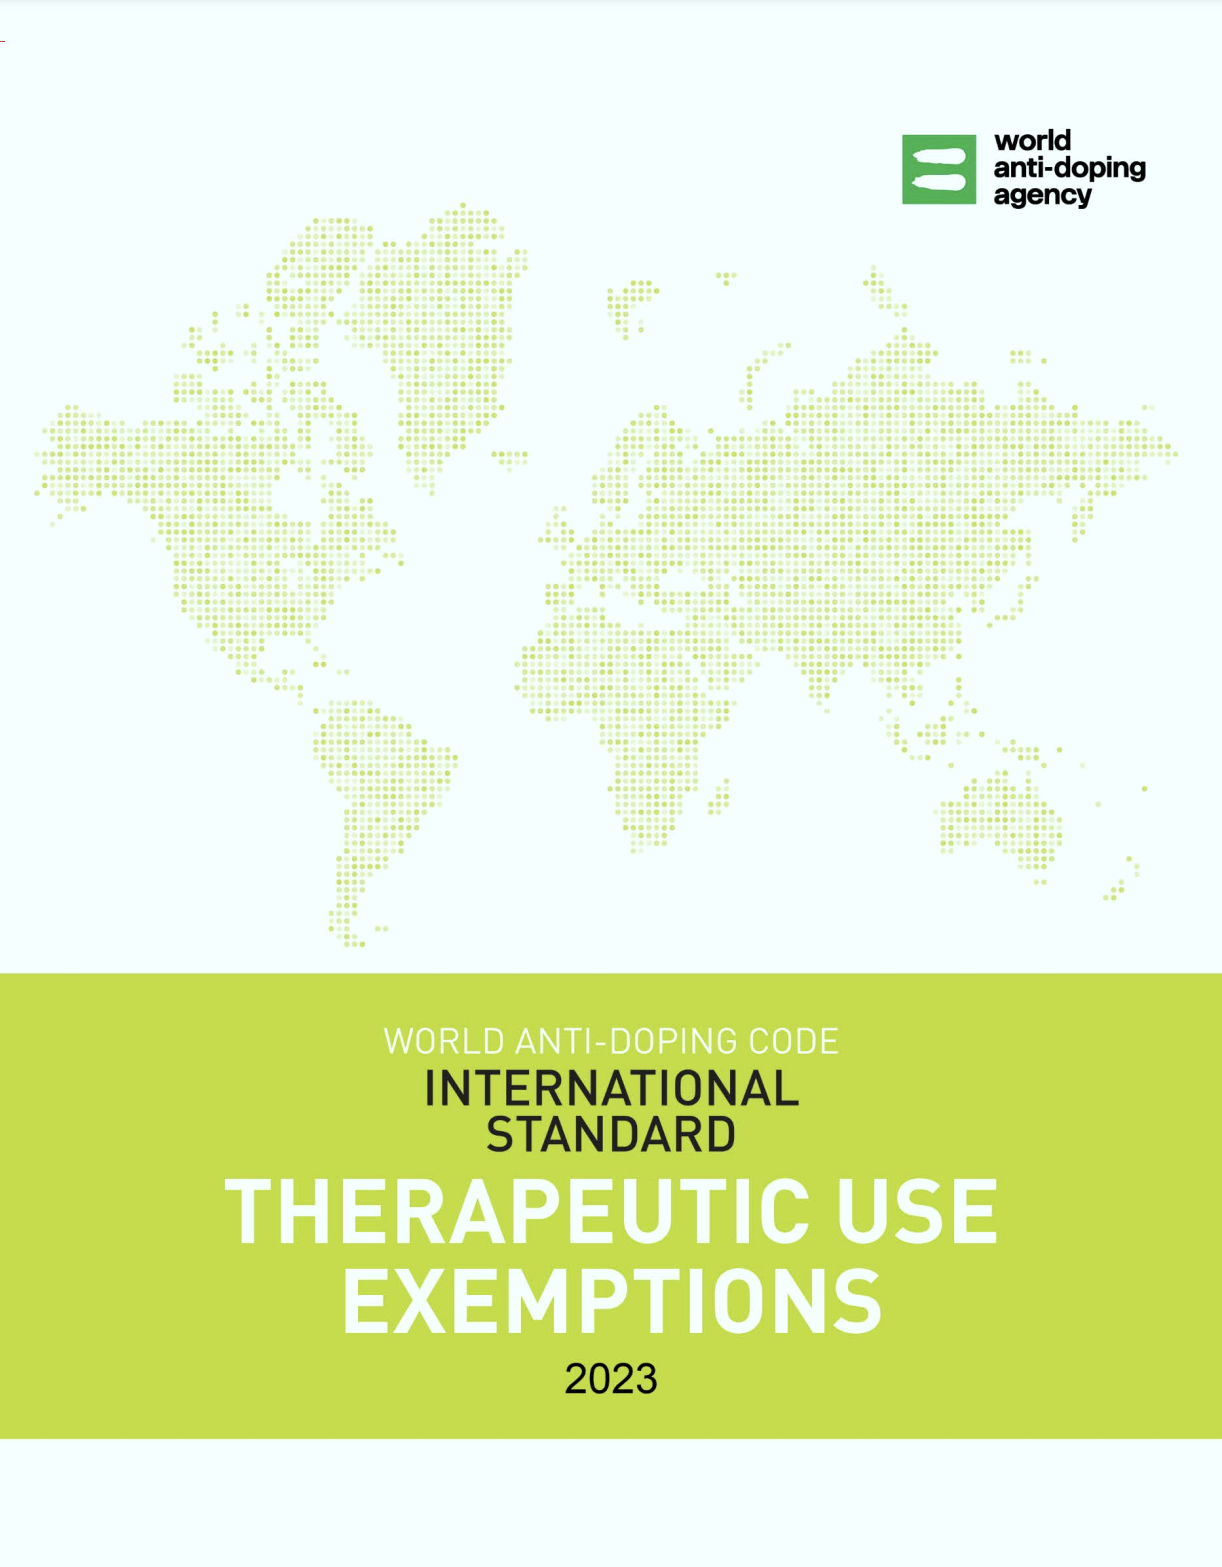 International Standard for Therapeutic Use Exemptions (ISTUE)